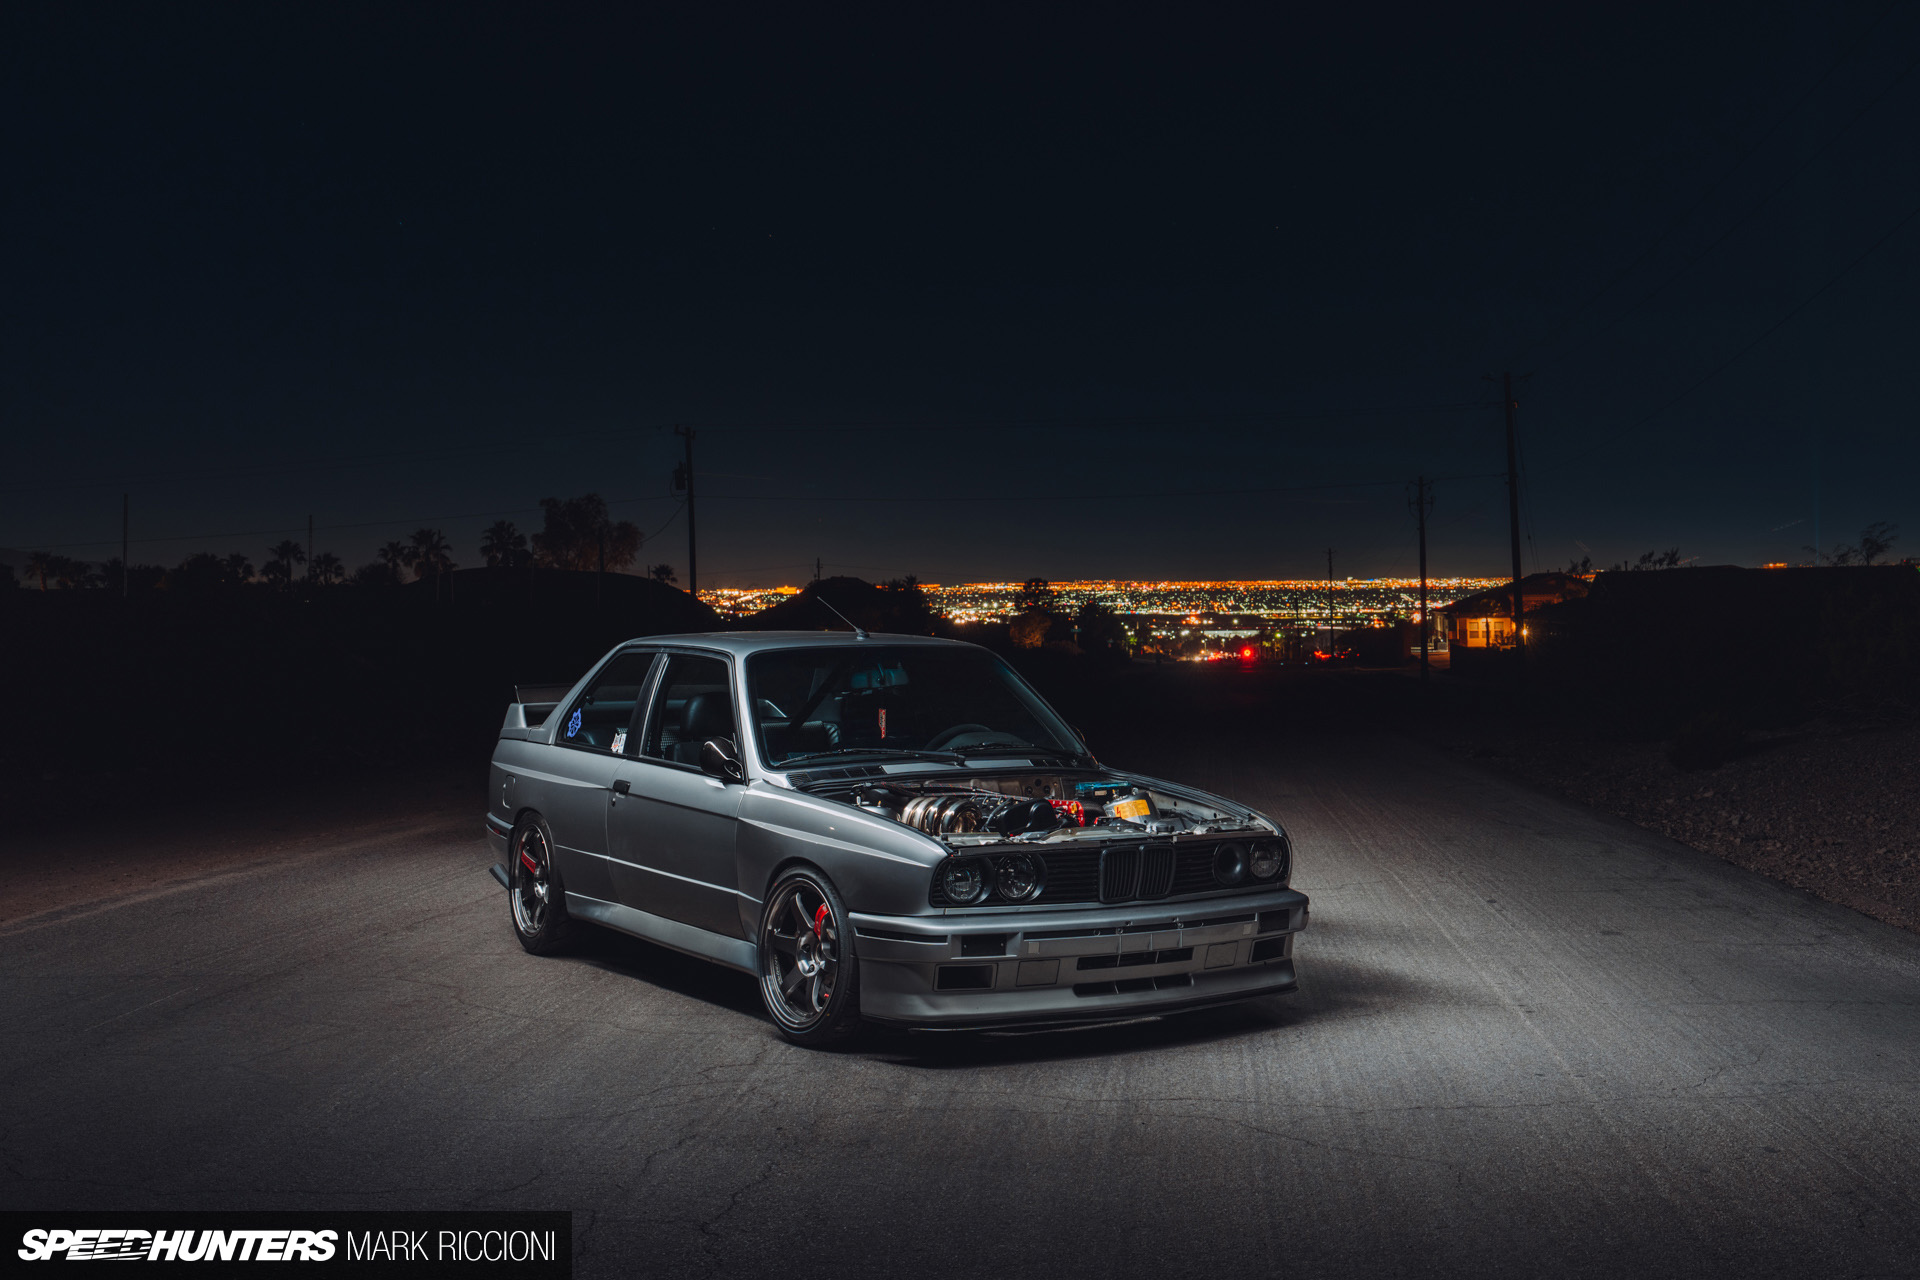 Buy yourself a BMW E30 M3 while you still can